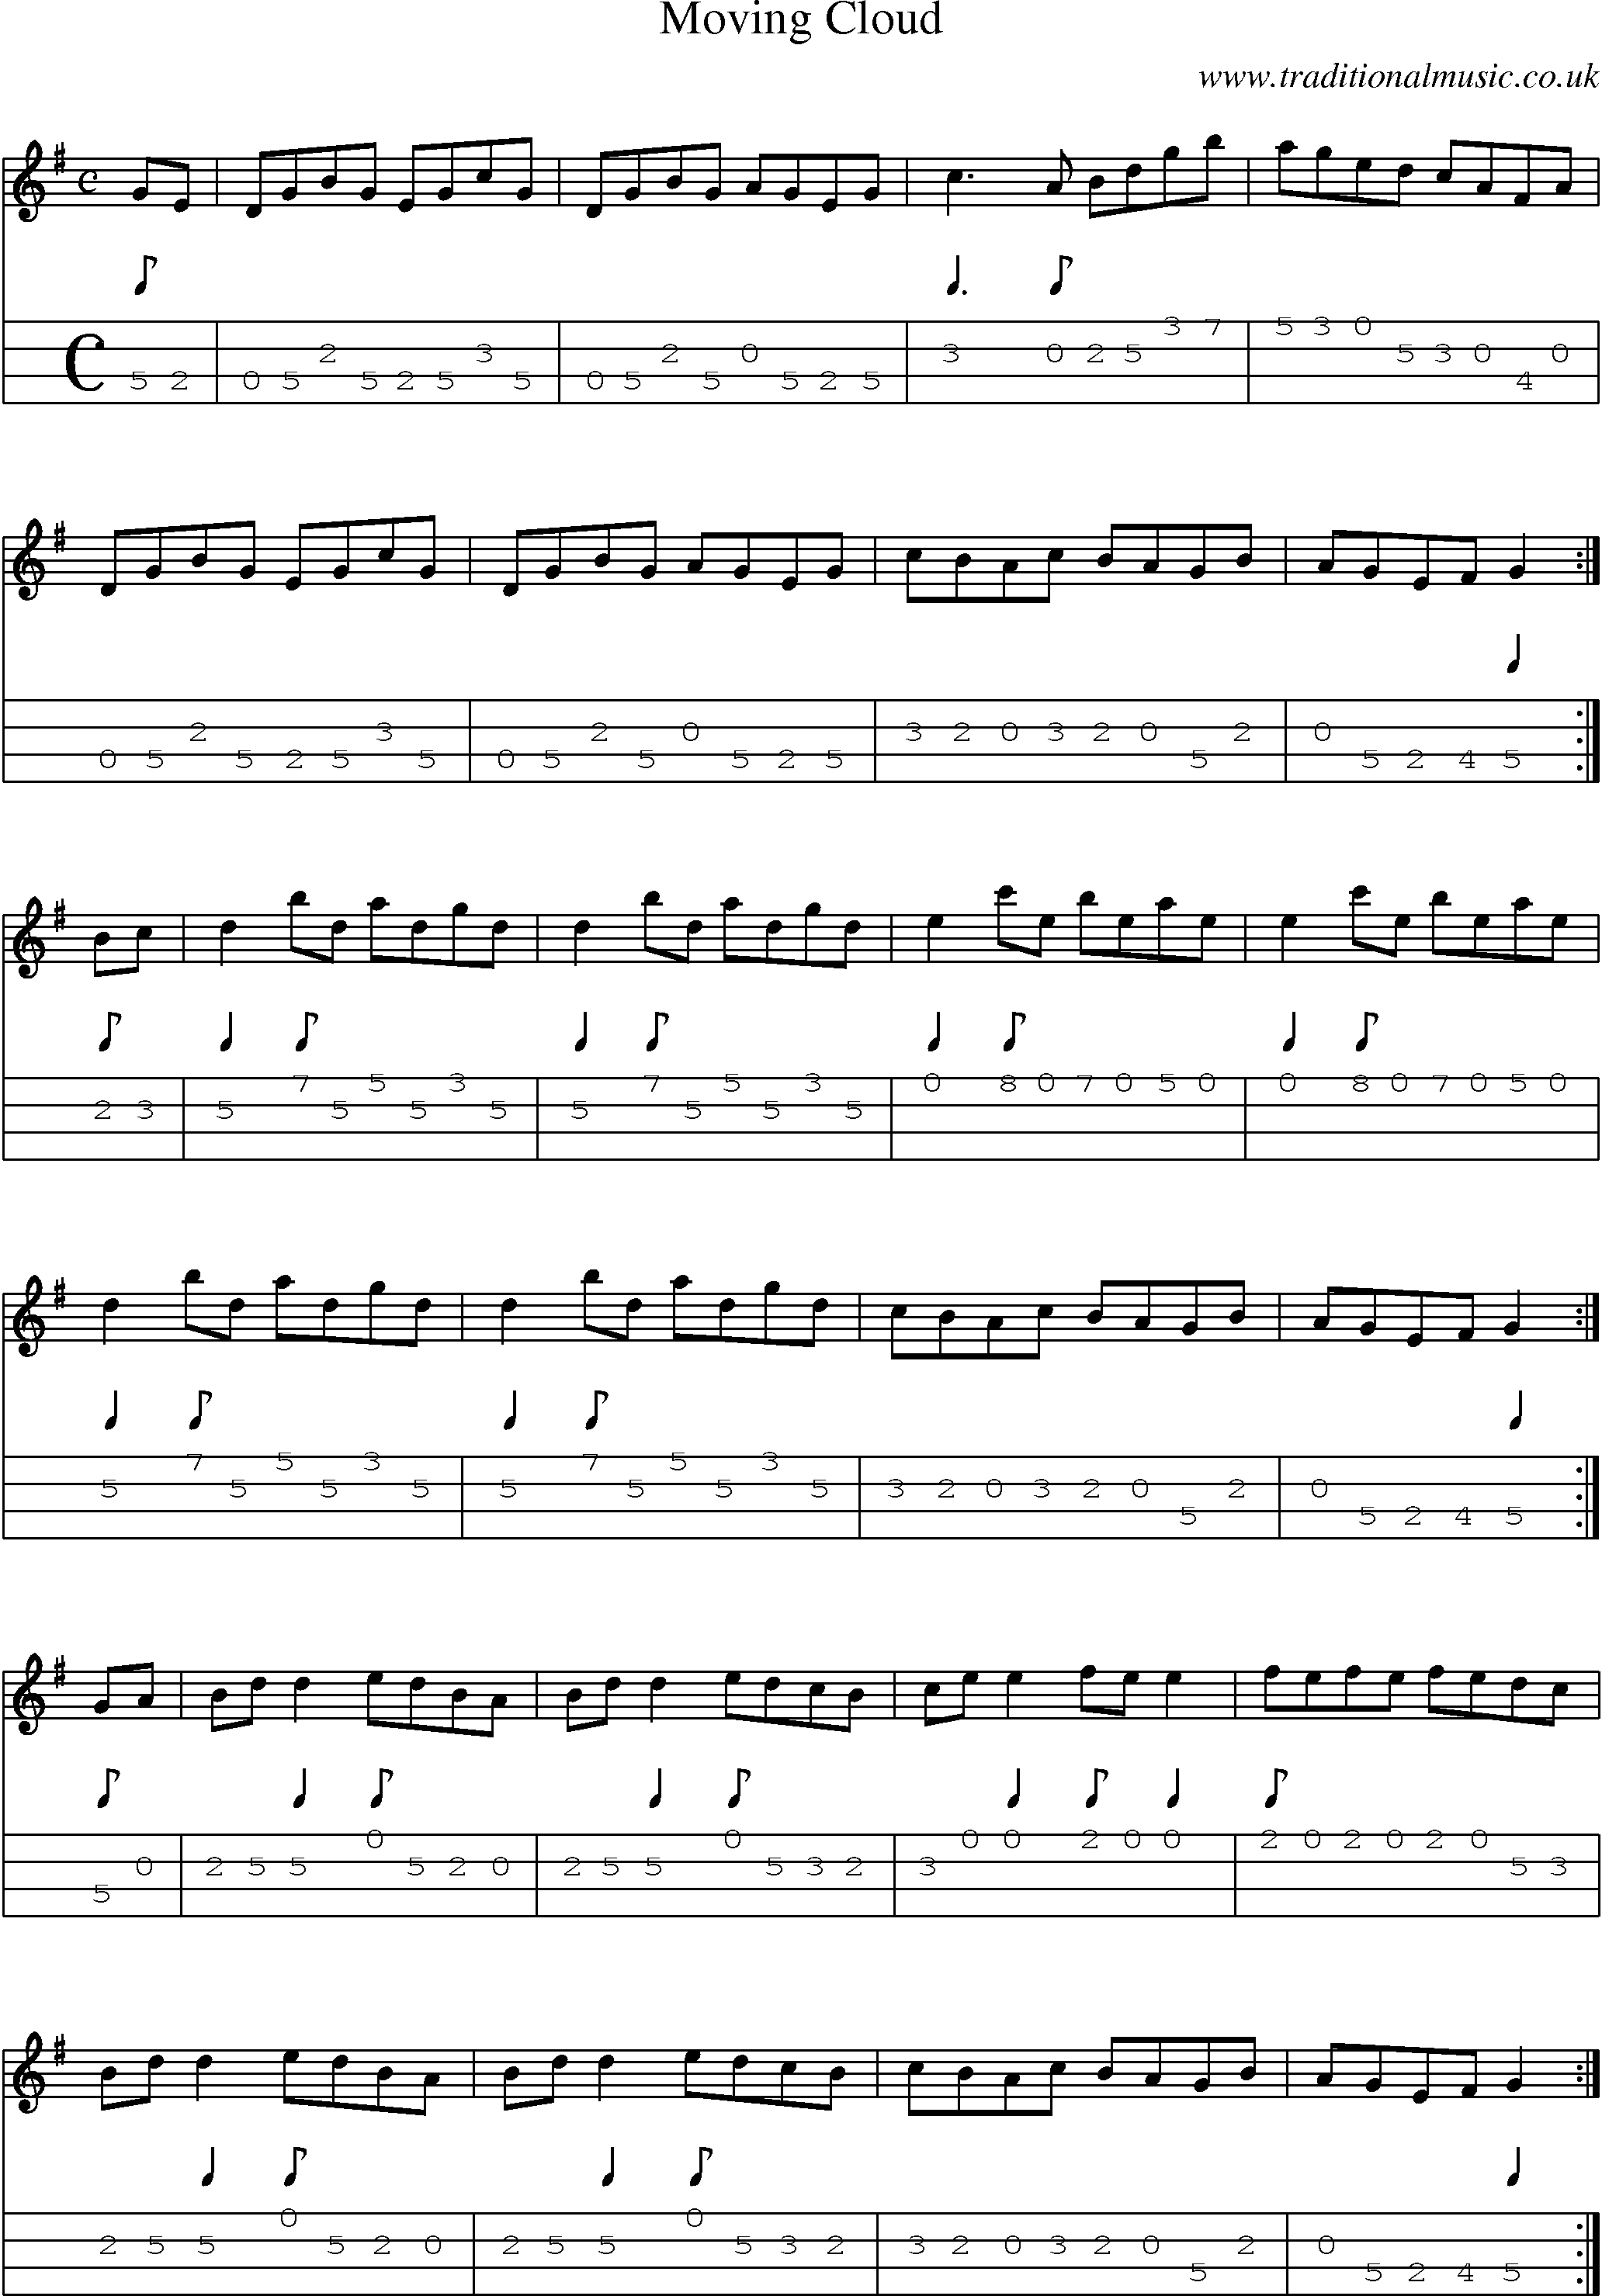 Music Score and Mandolin Tabs for Moving Cloud